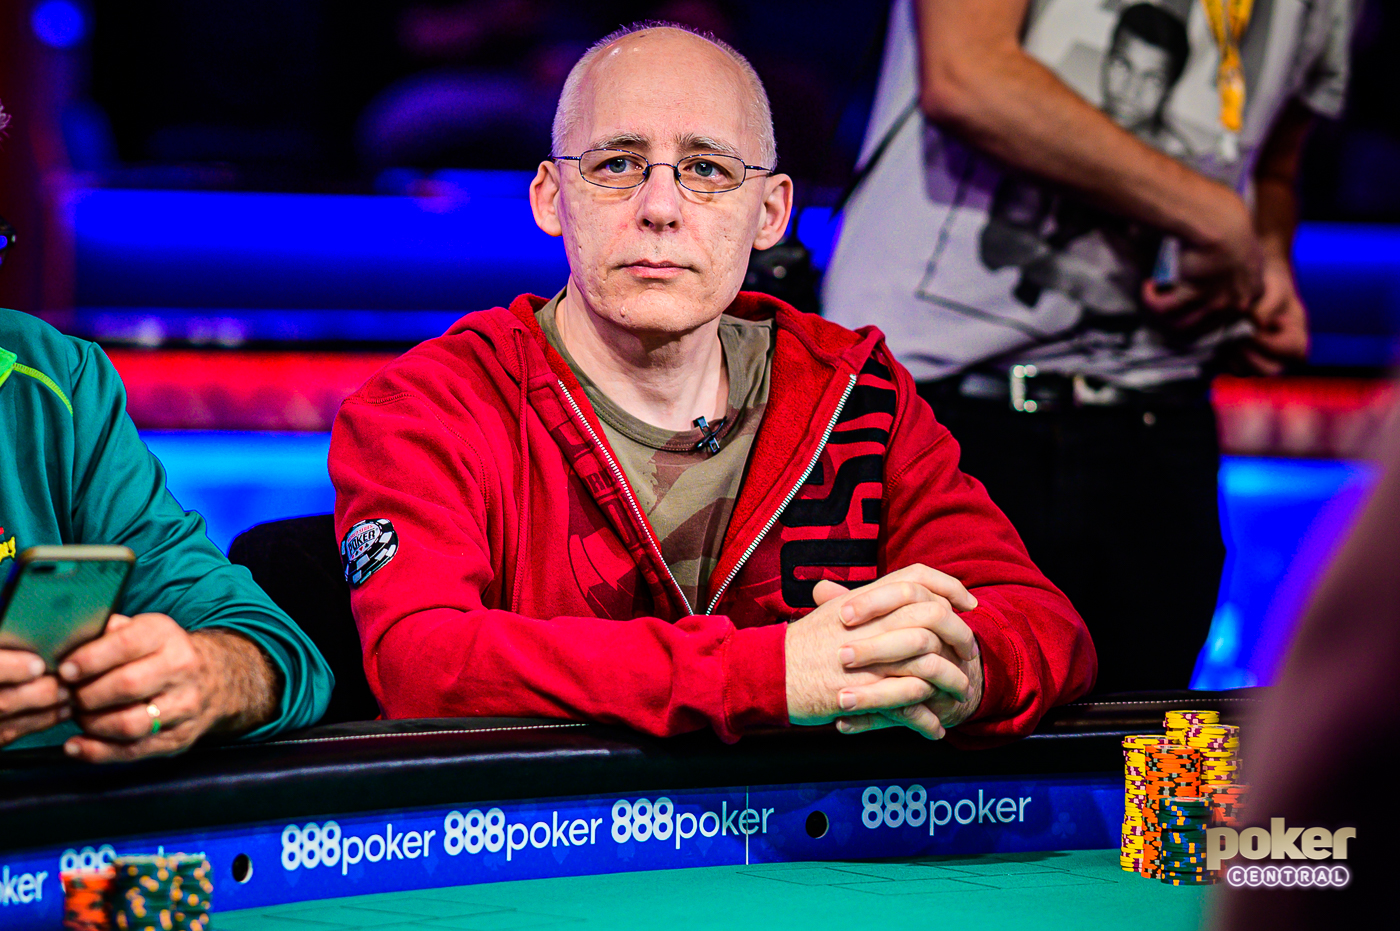 Talal Shakerchi during the 2019 World Series of Poker.